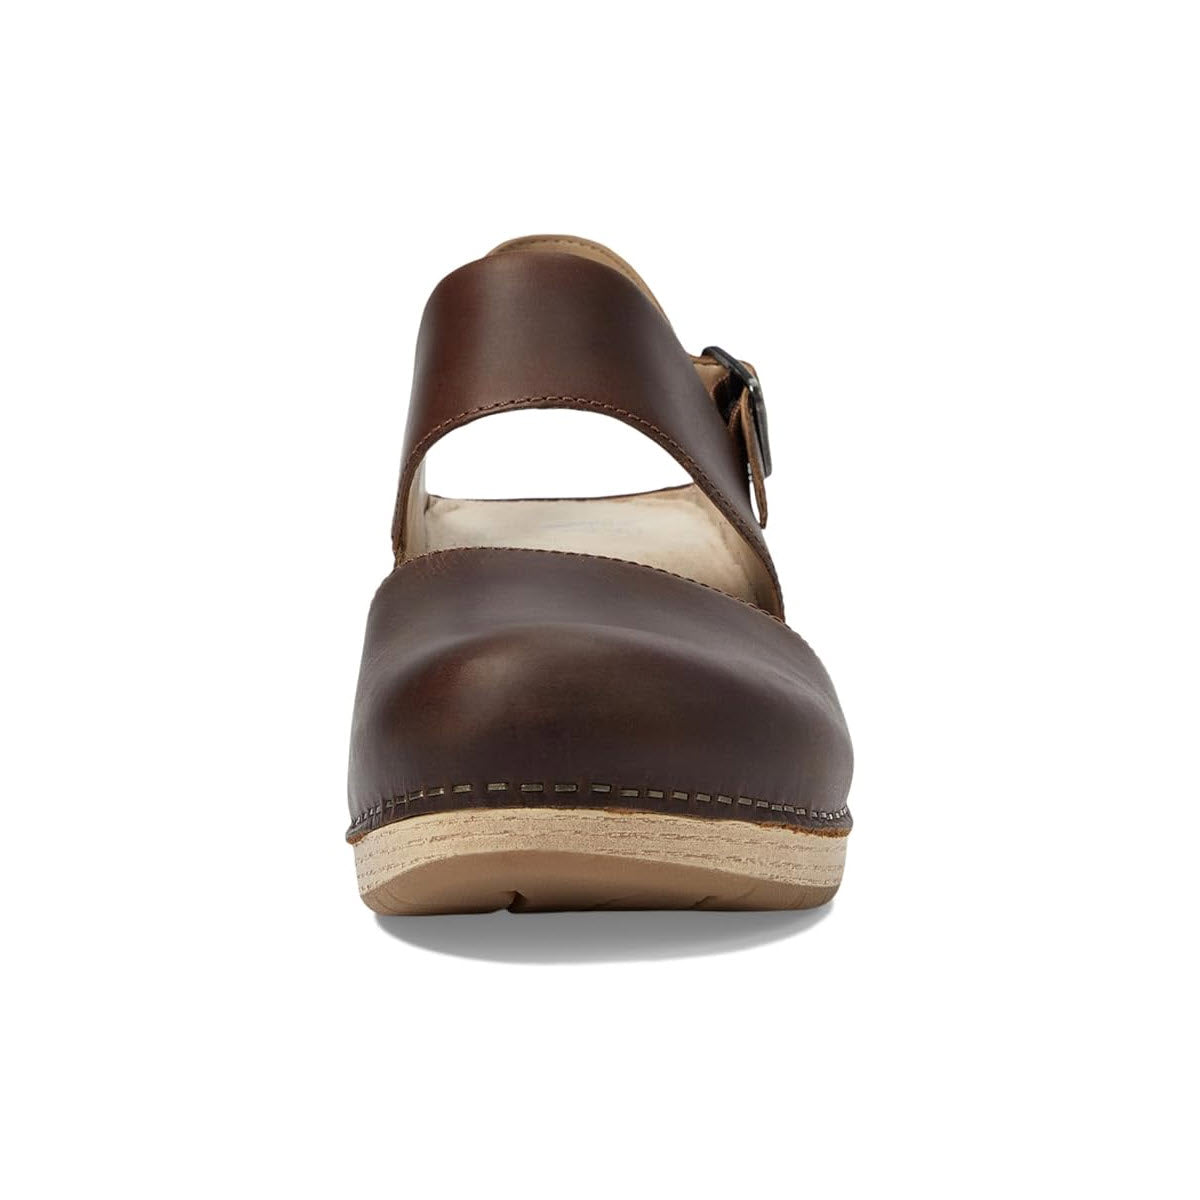 A brown leather clog with a closed toe and an adjustable heel strap, viewed from the front, set against a white background. Product Name: Dansko Lucia Tan - Womens